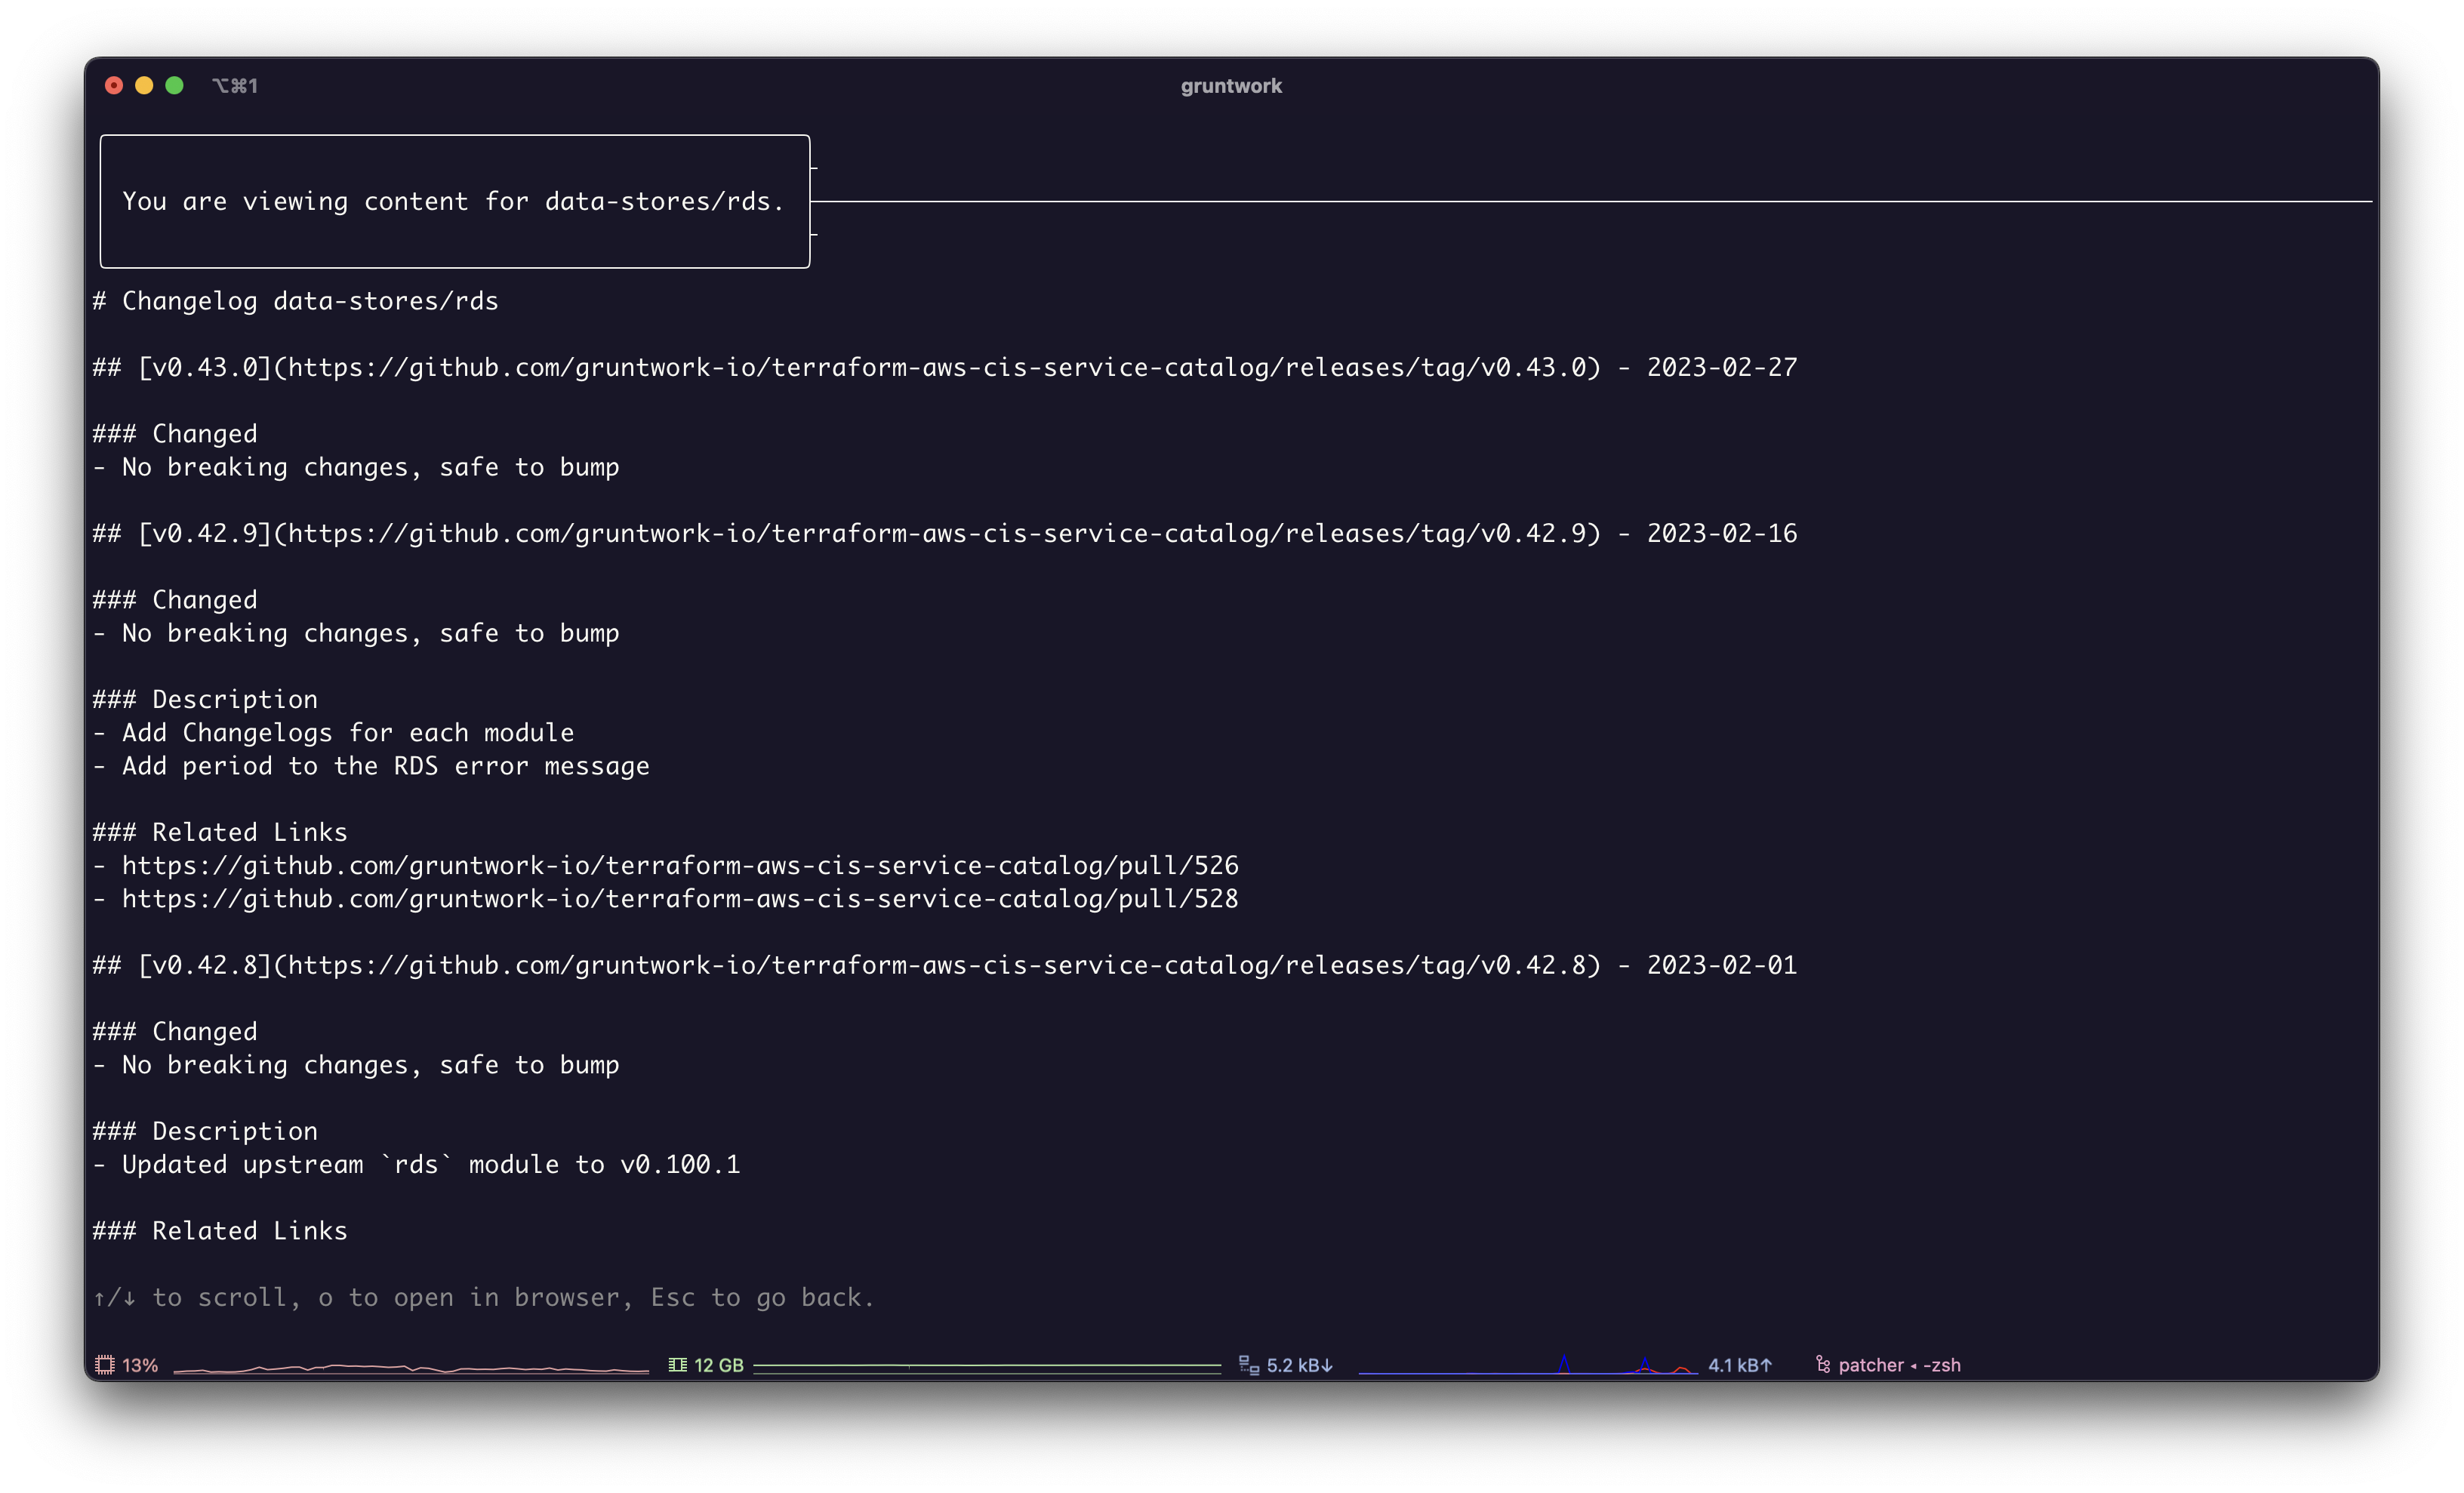 Screenshot of Patcher with changelogs for a module.